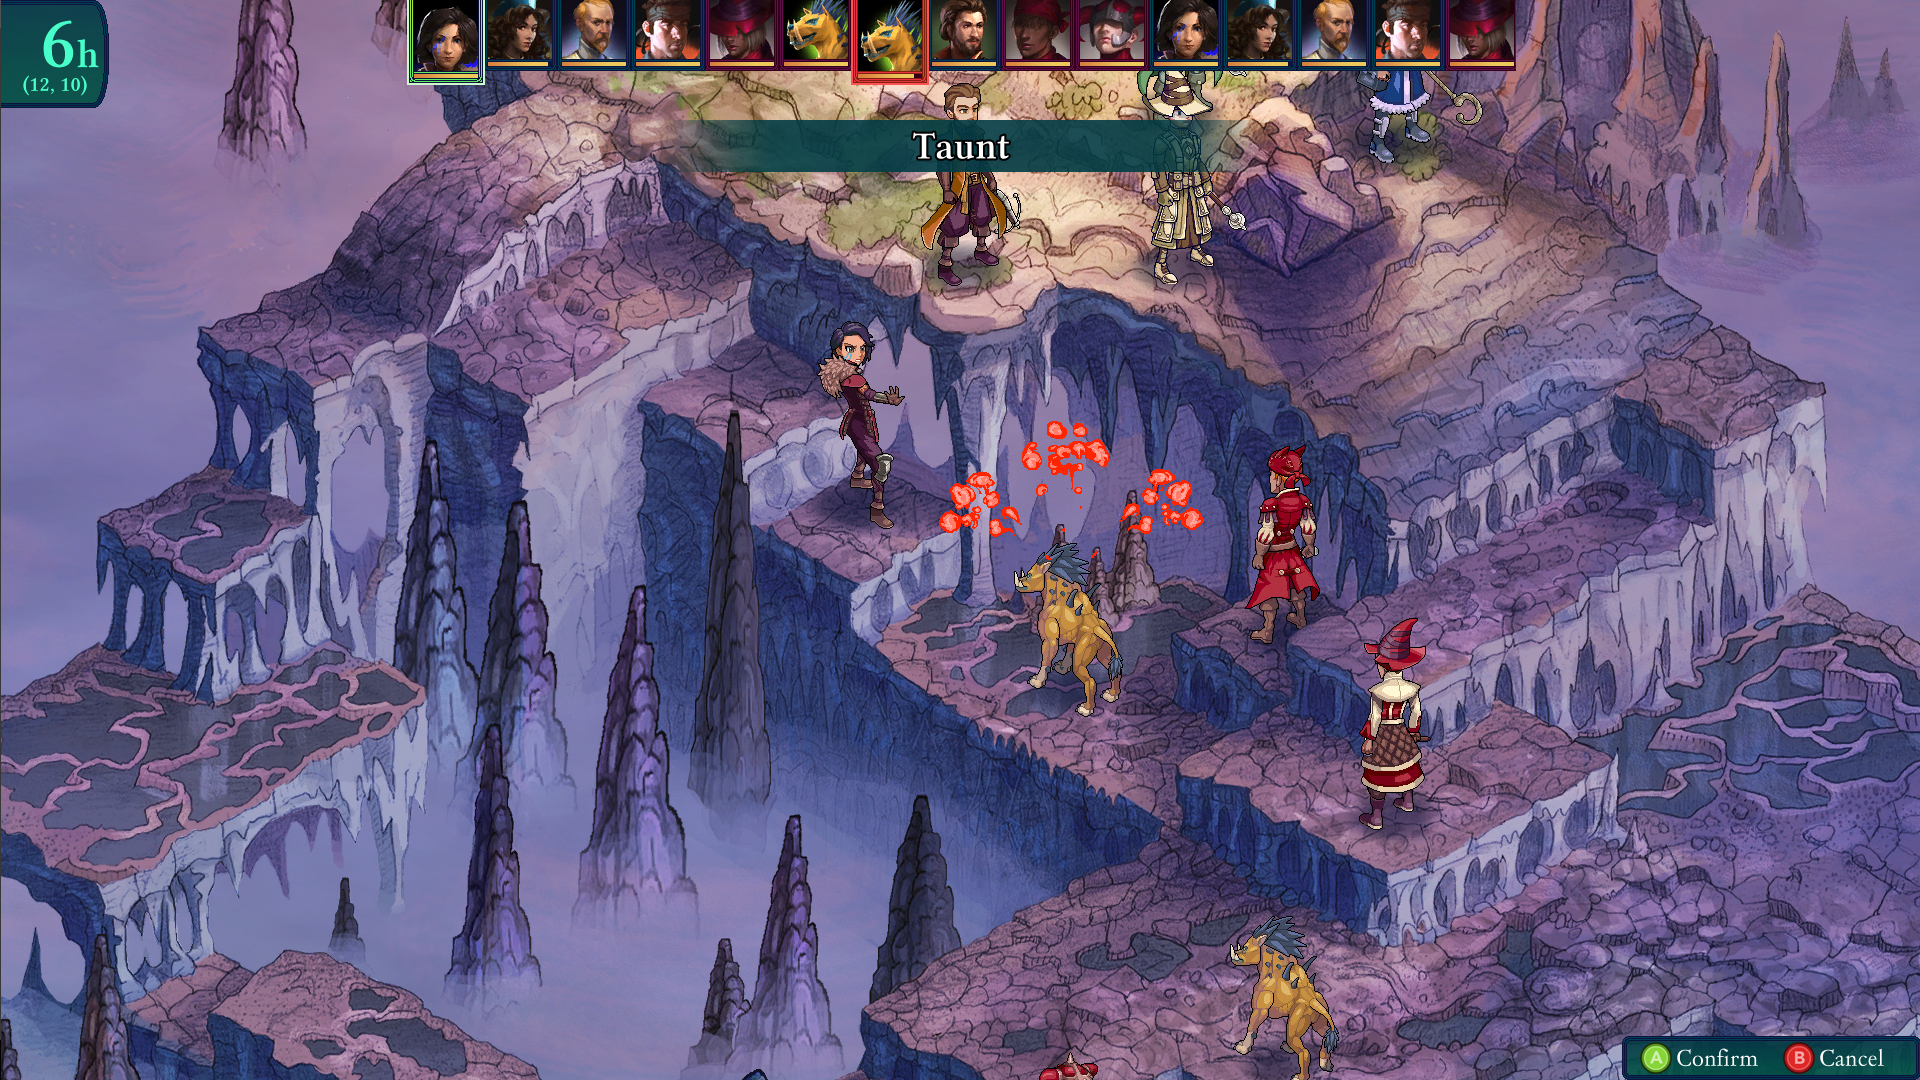 Turn-based tactical RPG that you can play at work